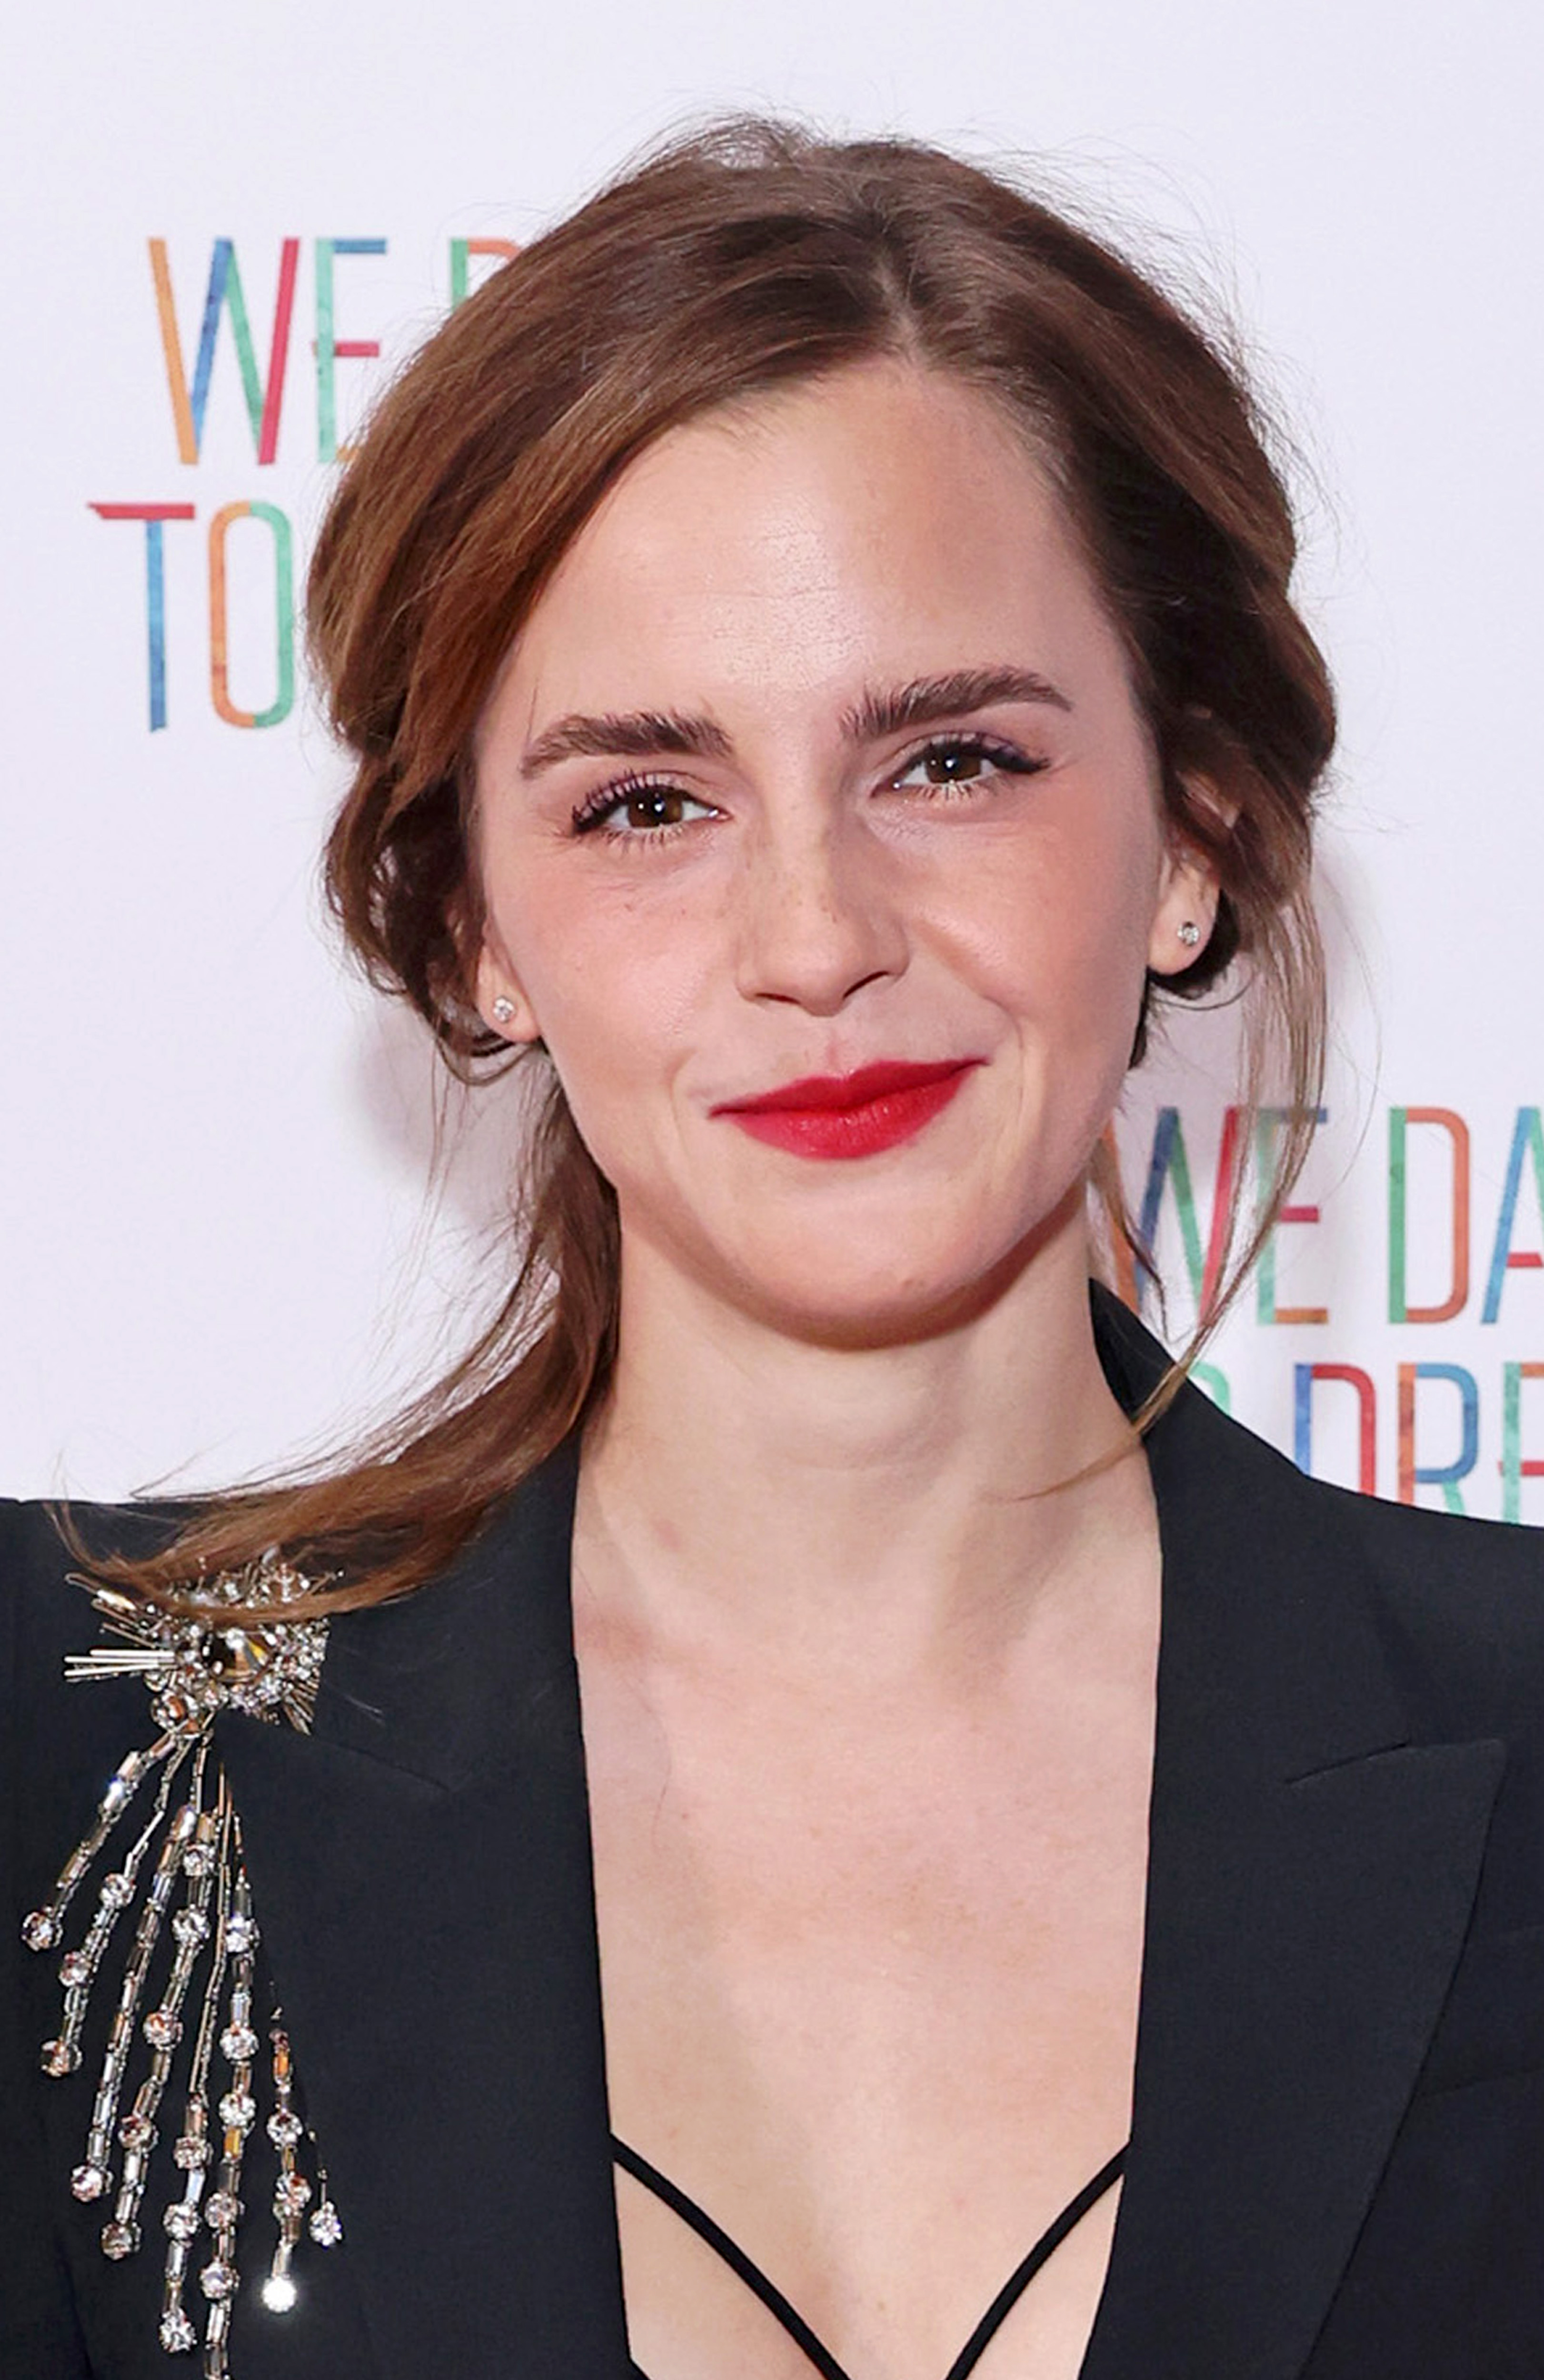 Emma Watson attends the "We Dare to Dream" premiere in London, England on November 26, 2023 | Source: Getty Images